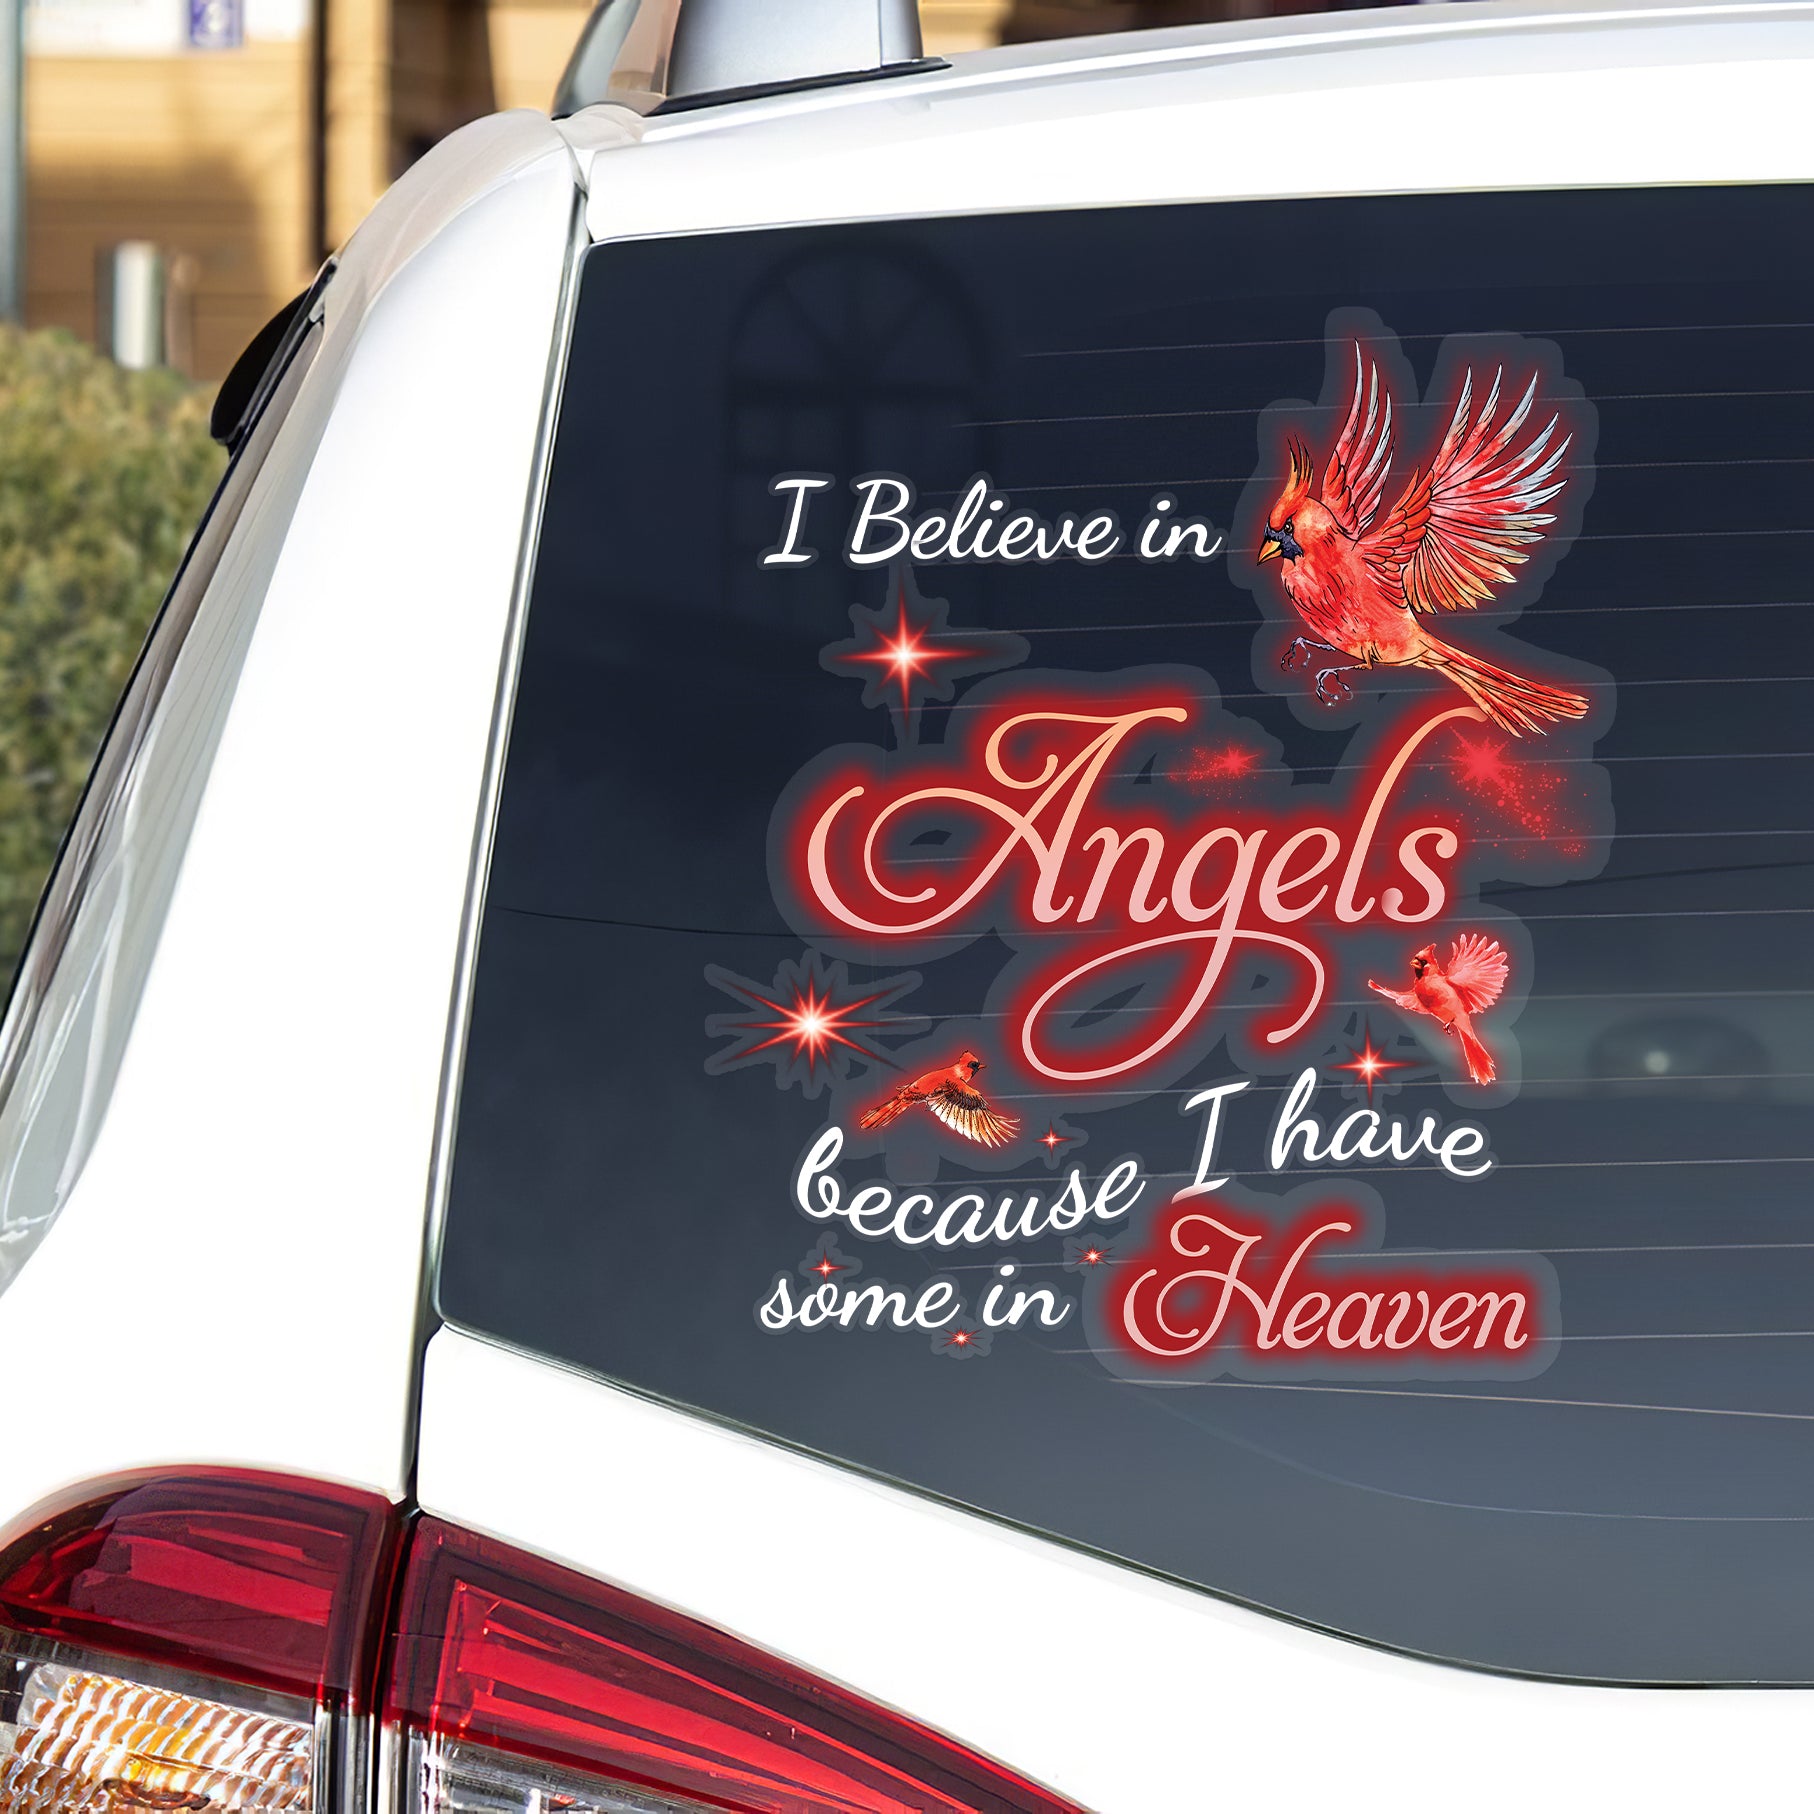 I believe in Angels because I have some in Heaven Vinyl Decal